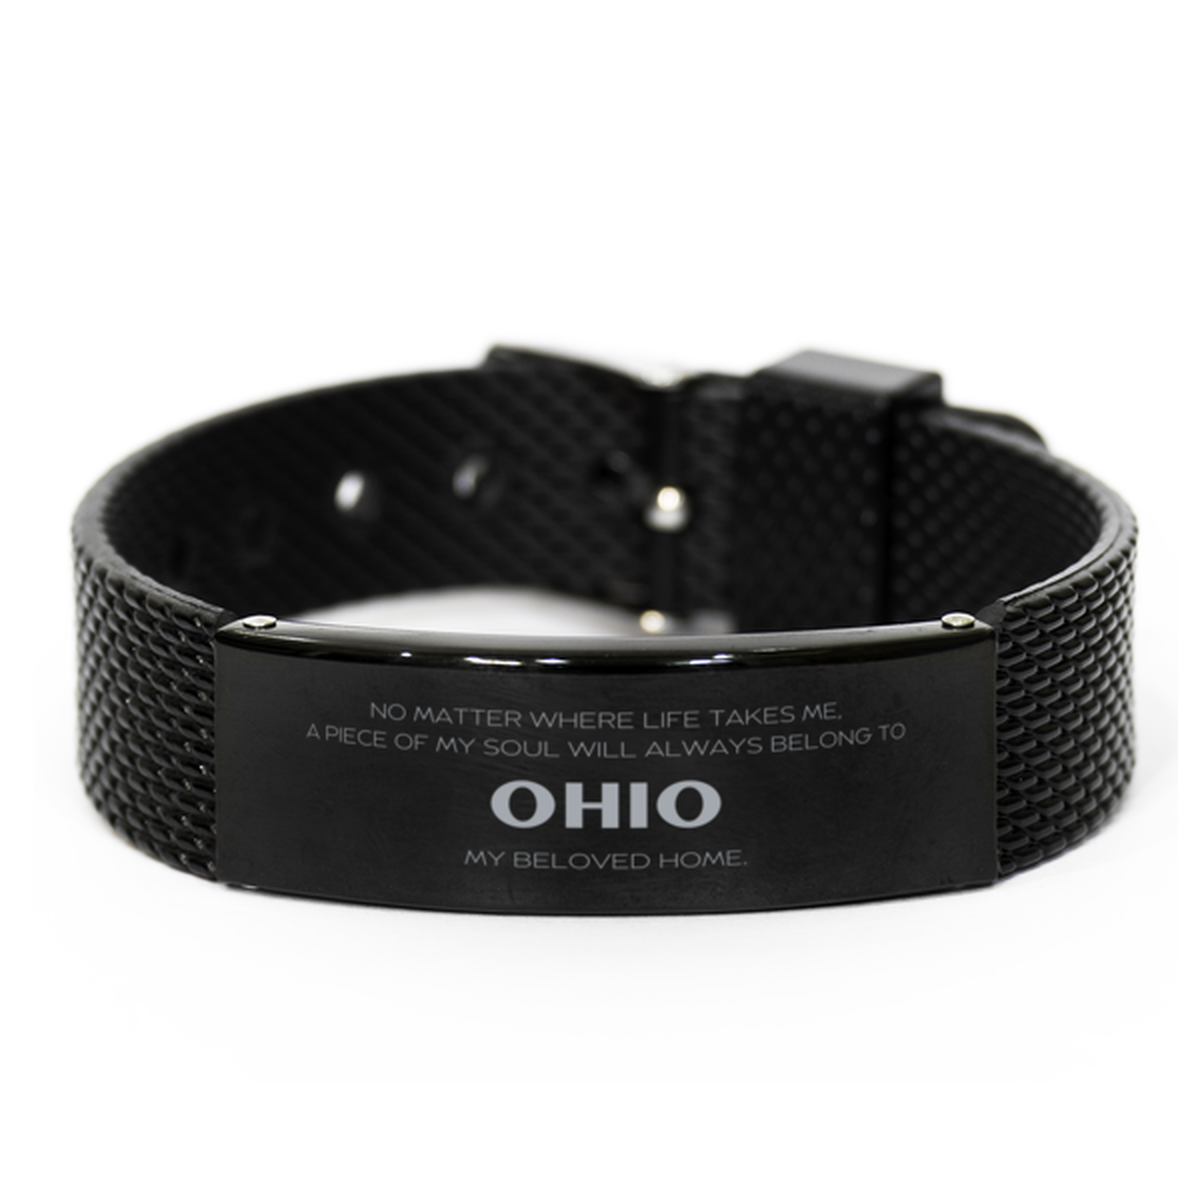 Love Ohio State Gifts, My soul will always belong to Ohio, Proud Black Shark Mesh Bracelet, Birthday Unique Gifts For Ohio Men, Women, Friends